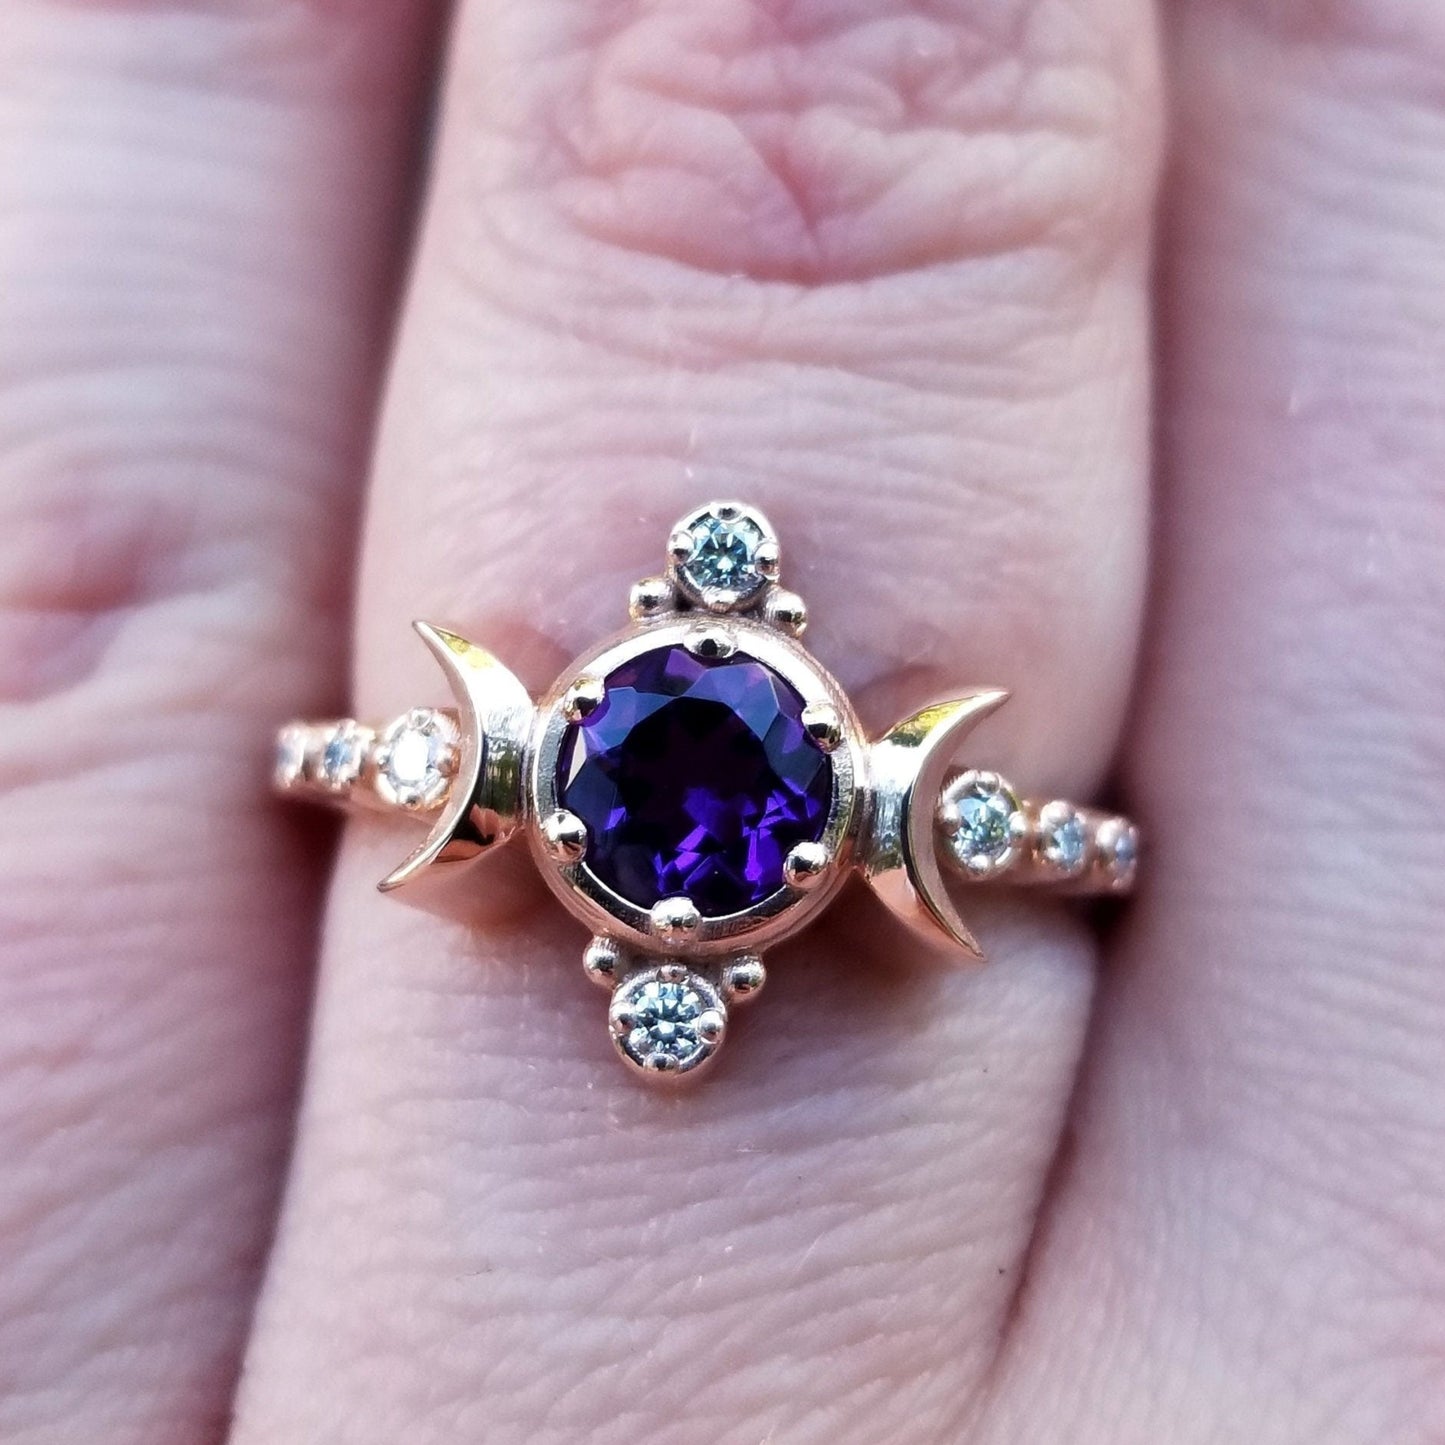 Amethyst Compass Moon Engagement Ring with Diamonds - 14k Rose Gold